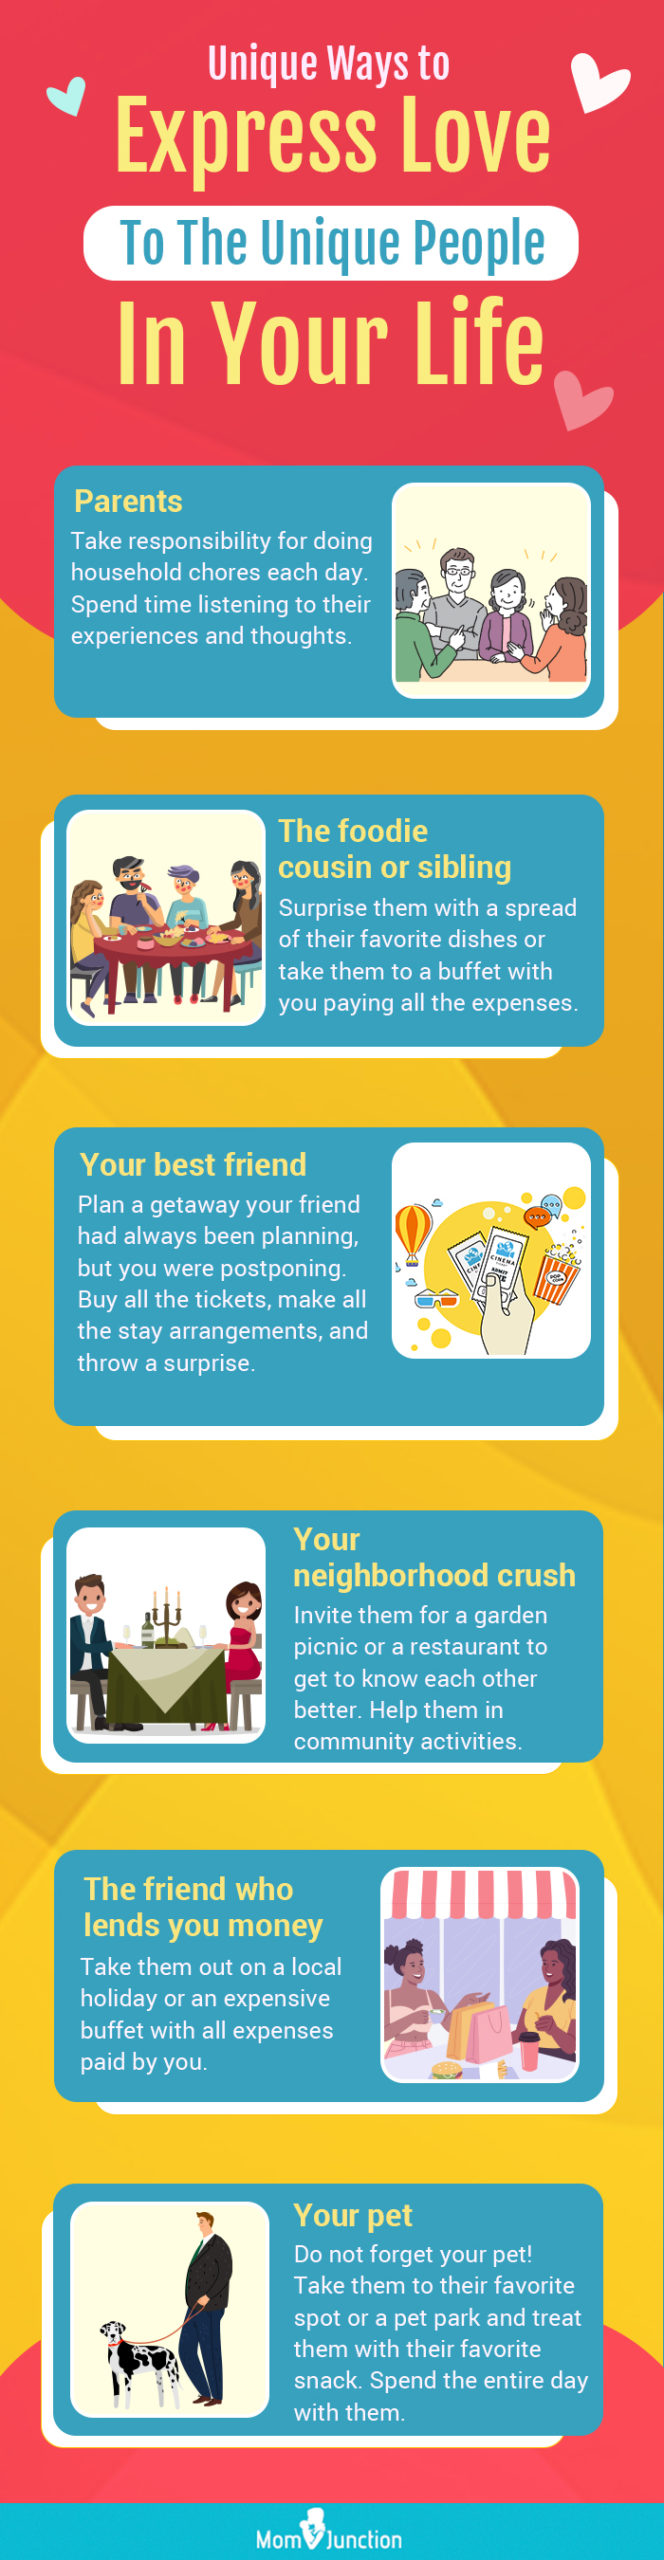 unique ways to express love to the unique people in your life (infographic)